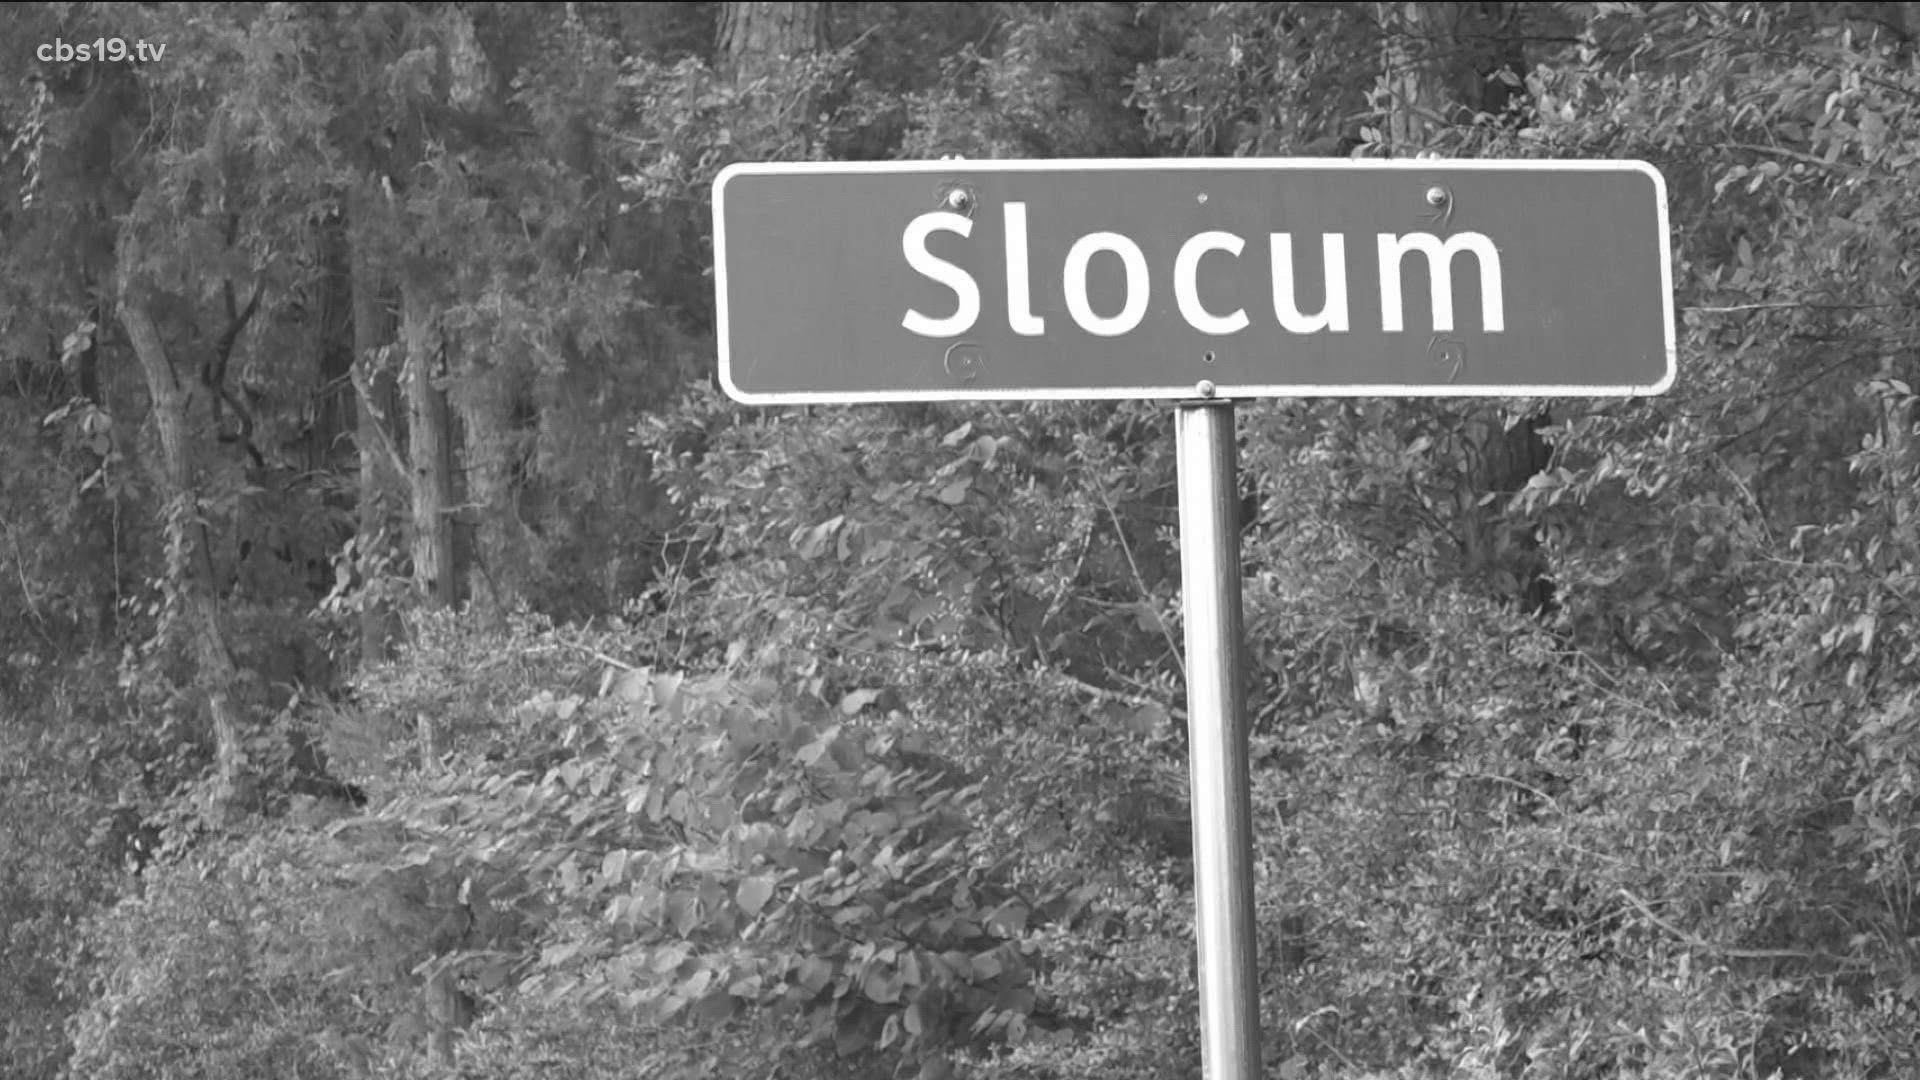 The official death count is listed as eight, but it's believed hundreds of people within the Black community of Slocum were killed.